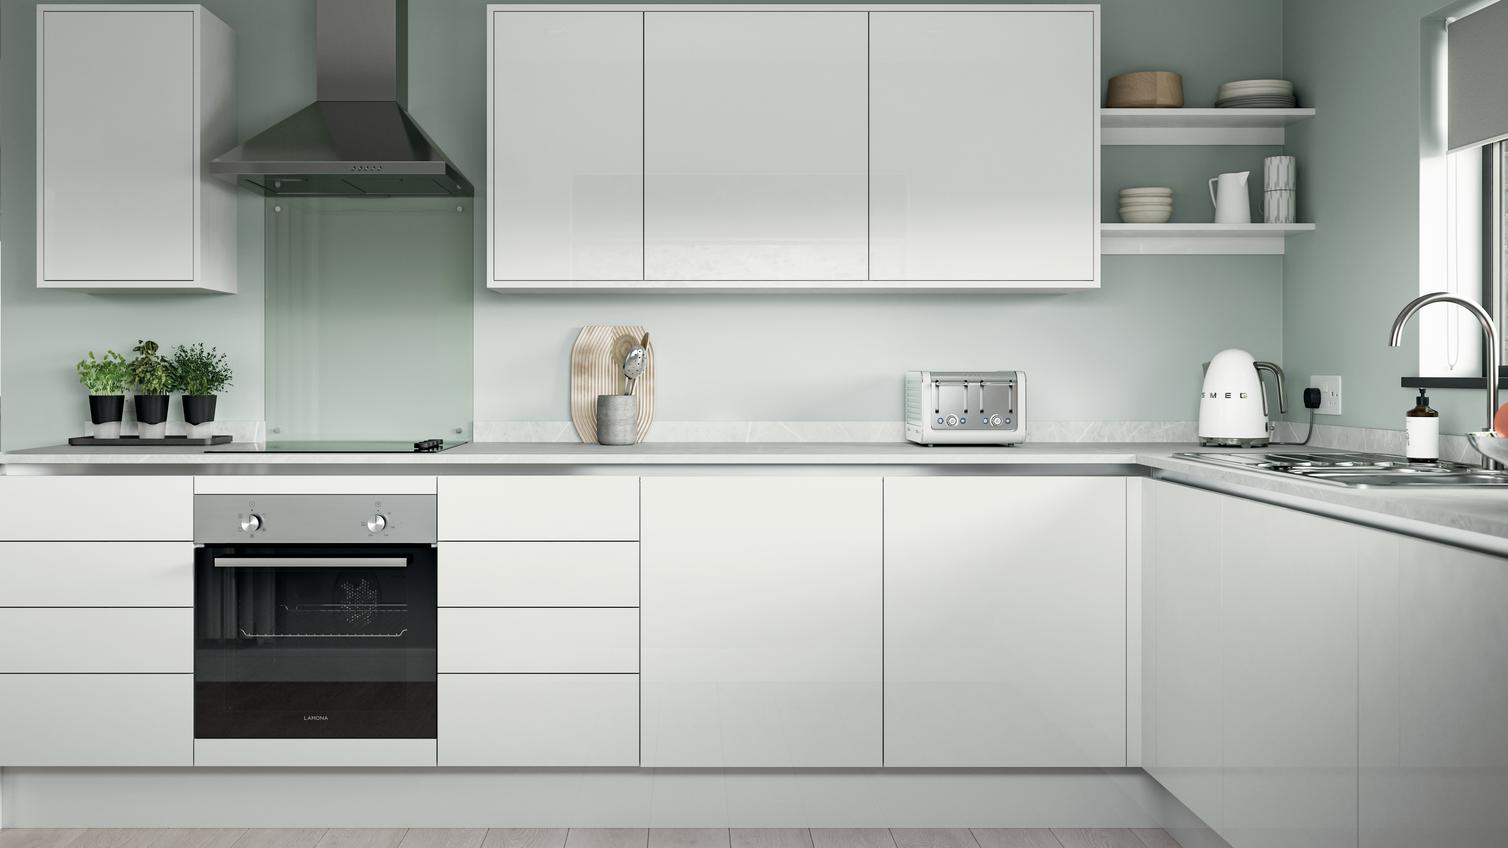 White l-shape kitchen with slab cupboards, white worktops, induction hob, and silver trims for an on-trend handleless look.